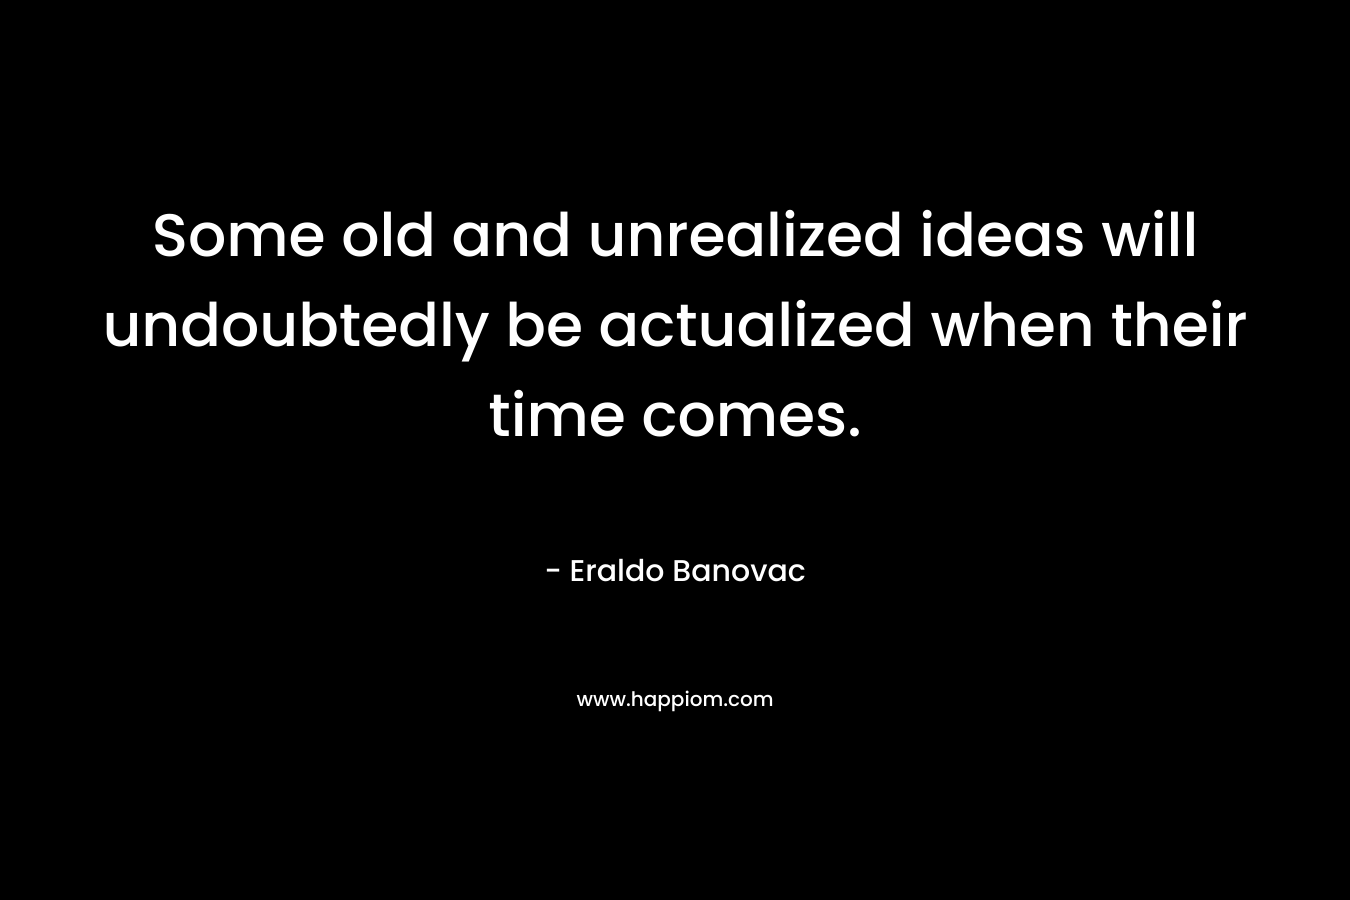 Some old and unrealized ideas will undoubtedly be actualized when their time comes.